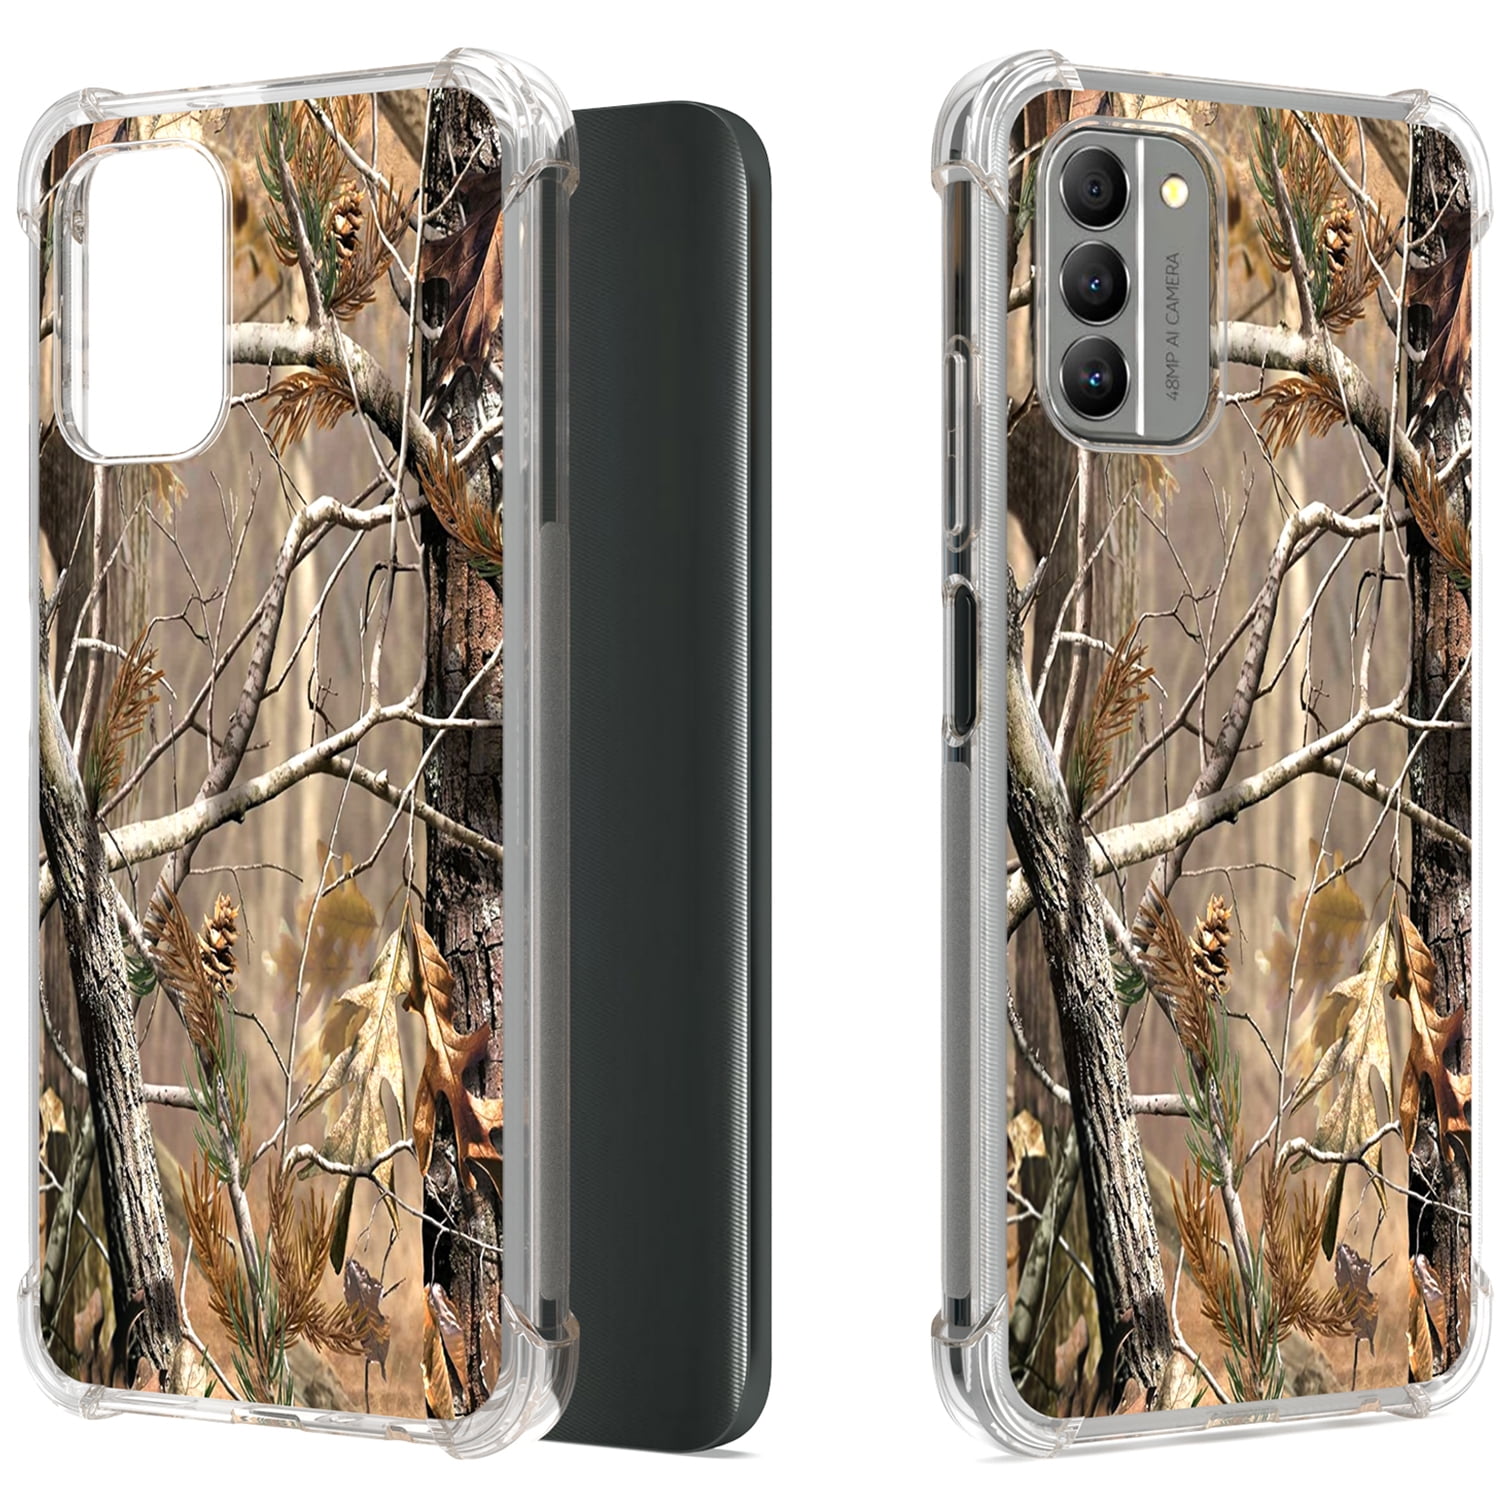 Soedan Uitwisseling wapenkamer CoverON Phone Design For Nokia G400 5G Case, Clear Flexible Soft Rubber  Slim TPU Cover, Camouflage - Walmart.com